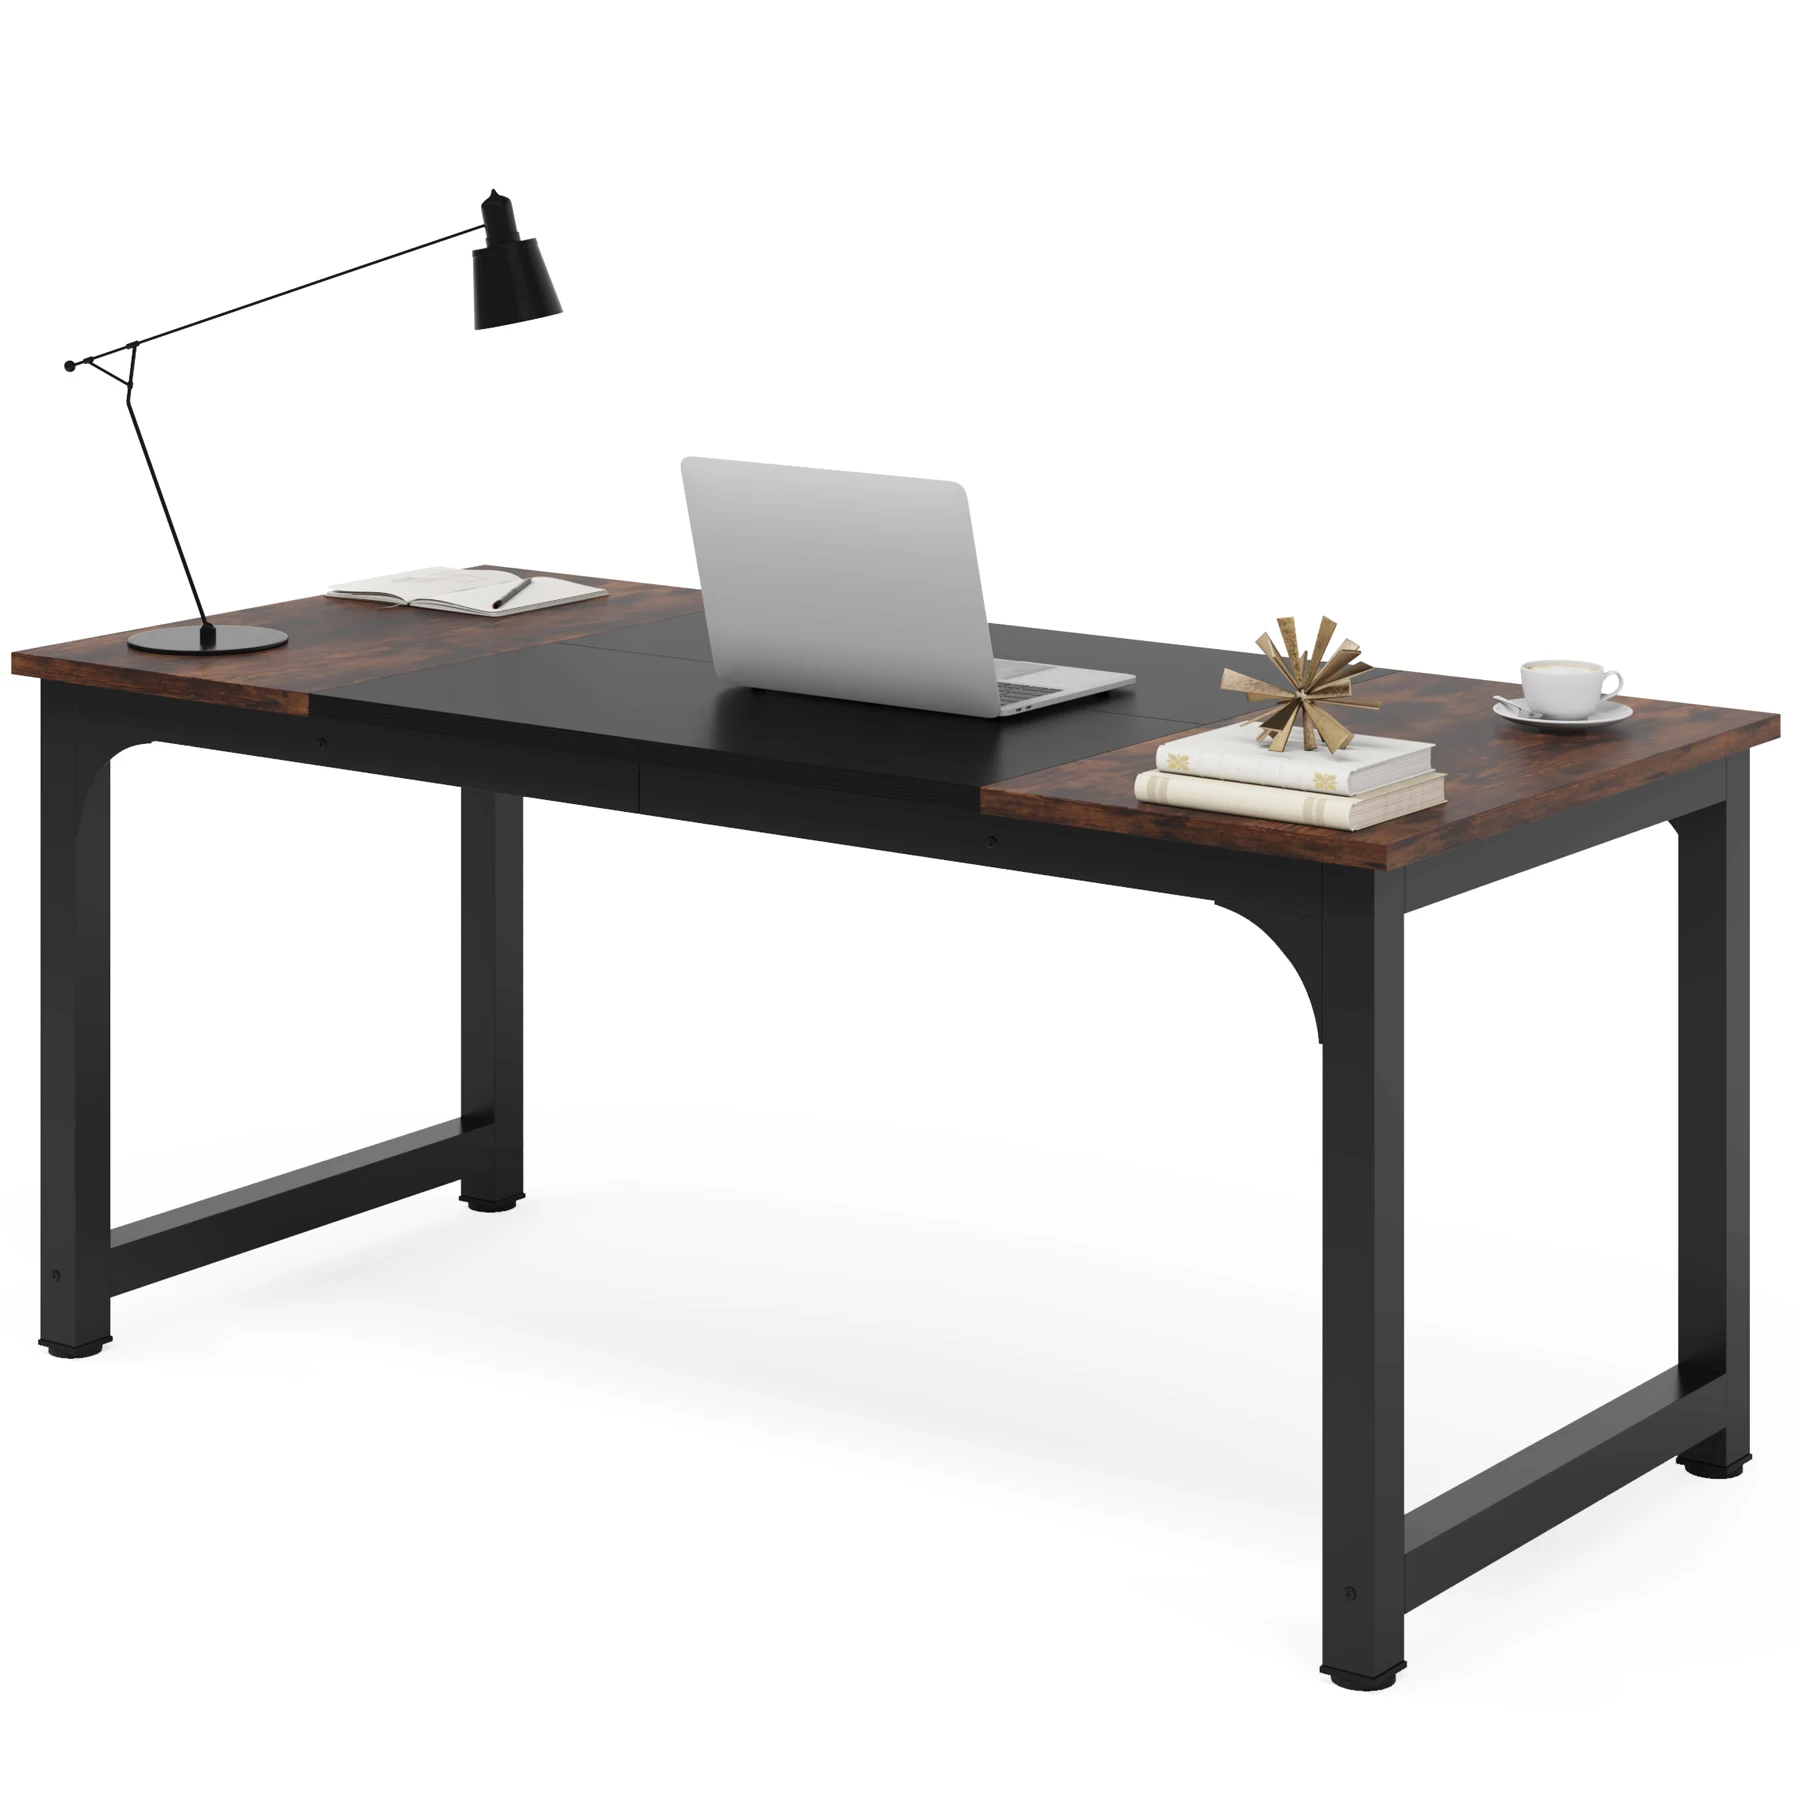 Tribesigns industrial style office furniture office meeting table for office boardroom